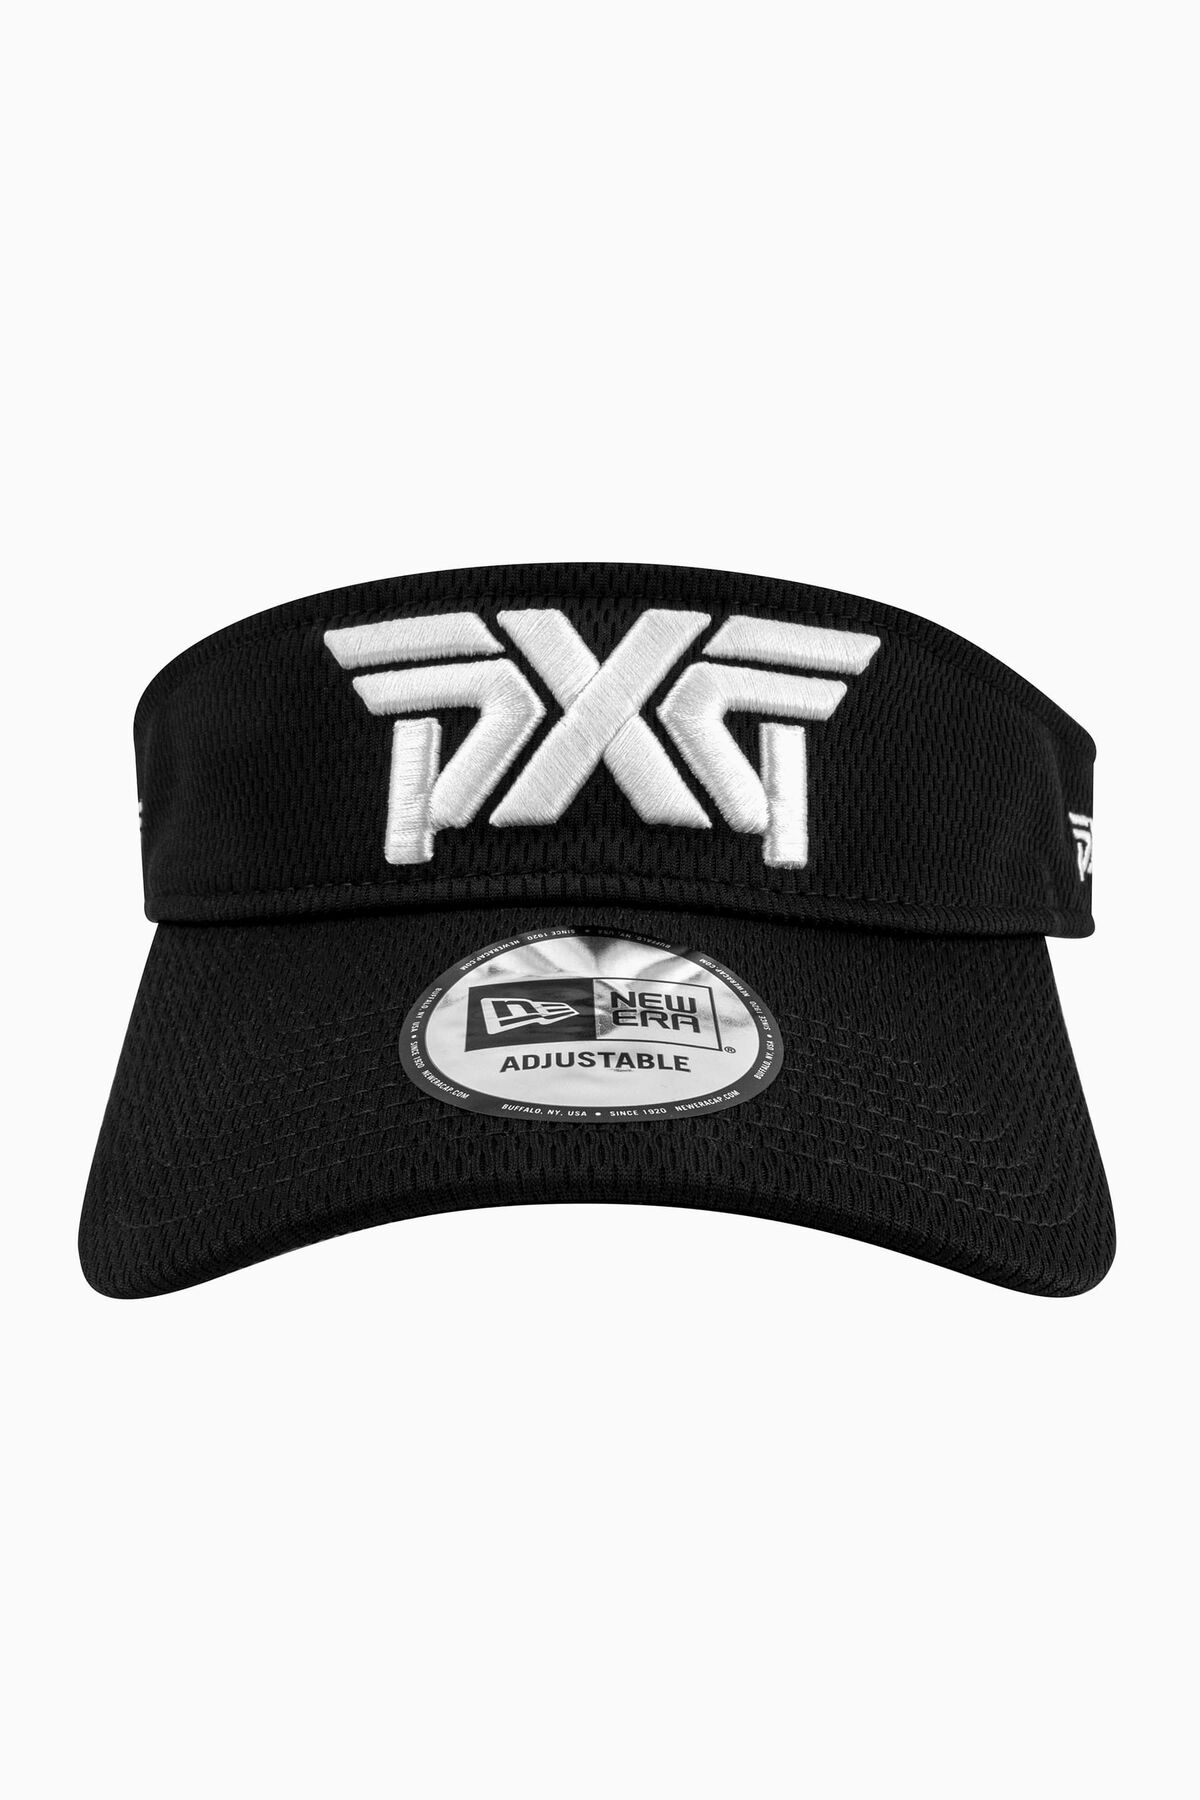 Clubs Visor Highest at Line | PXG Sport Accessories the Apparel, Golf Quality Shop Golf Gear, and Performance